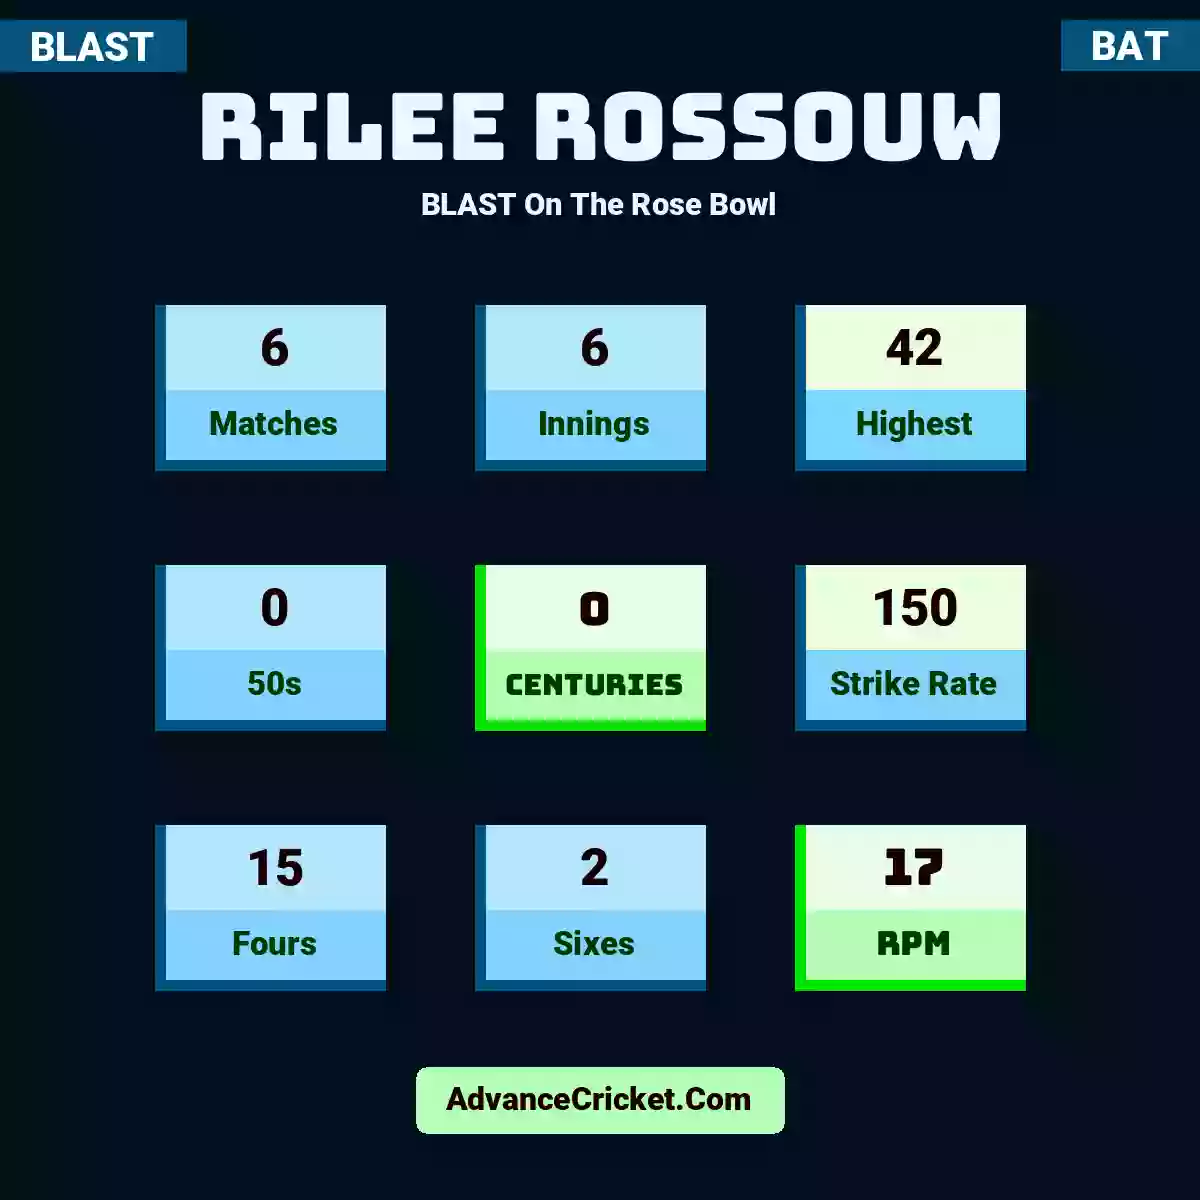 Rilee Rossouw BLAST  On The Rose Bowl, Rilee Rossouw played 6 matches, scored 42 runs as highest, 0 half-centuries, and 0 centuries, with a strike rate of 150. R.Rossouw hit 15 fours and 2 sixes, with an RPM of 17.